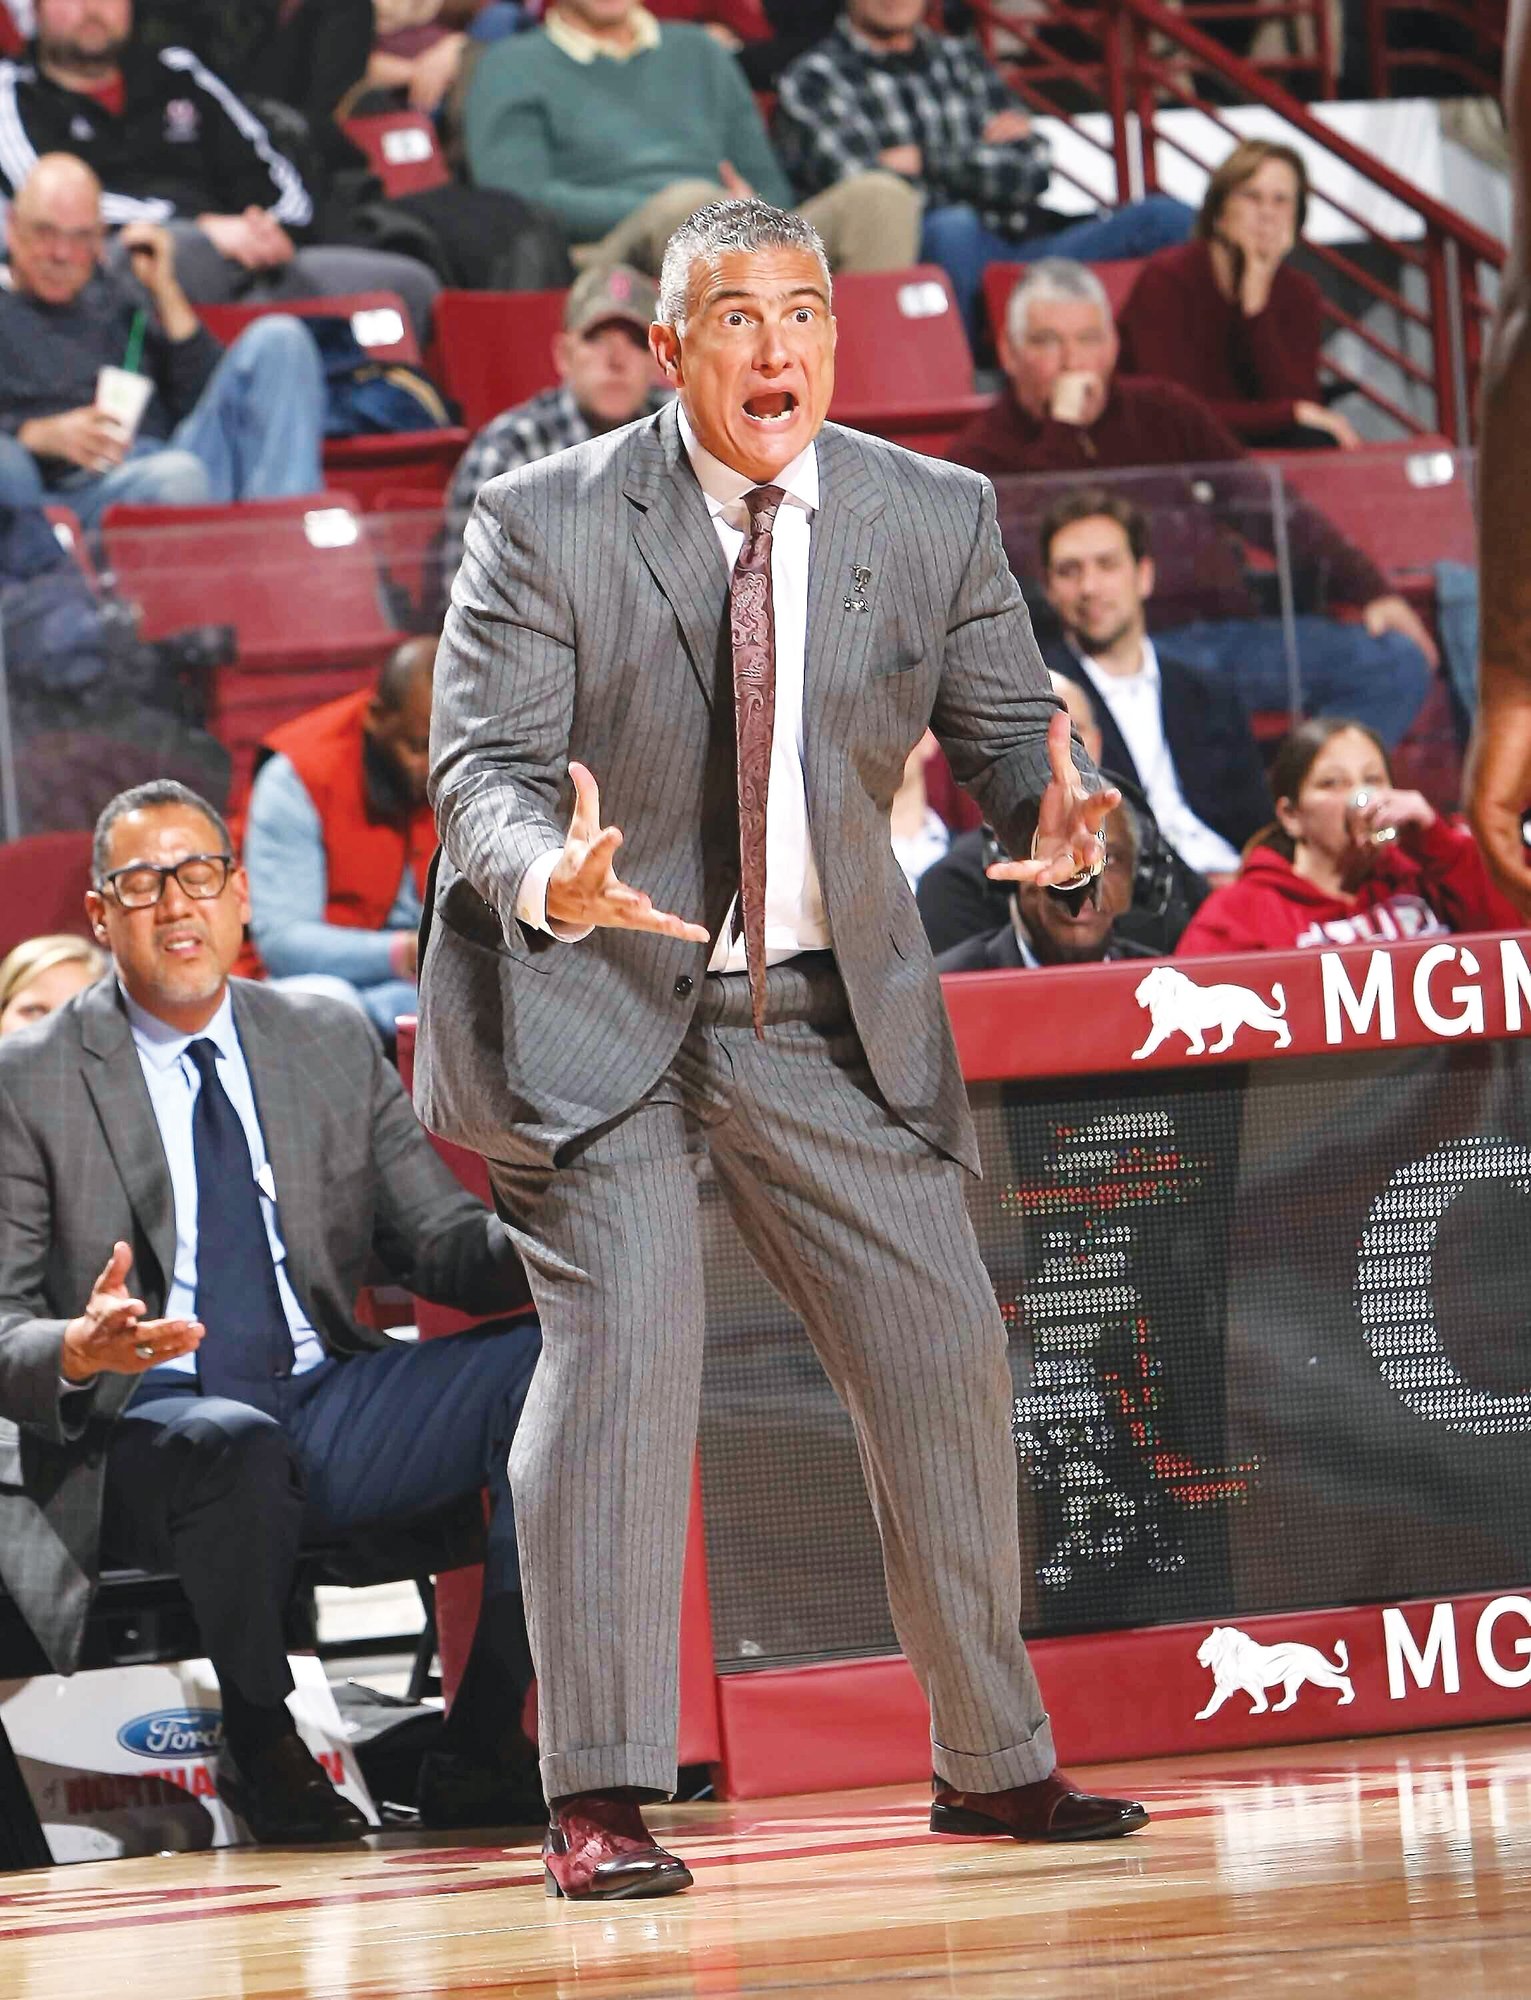 South Carolina head coach Frank Martin, yells at his players during the first half of an NCAA college basketball game against Massachusetts Wednesday, Dec. 4, 2019, in Amherst, Mass.